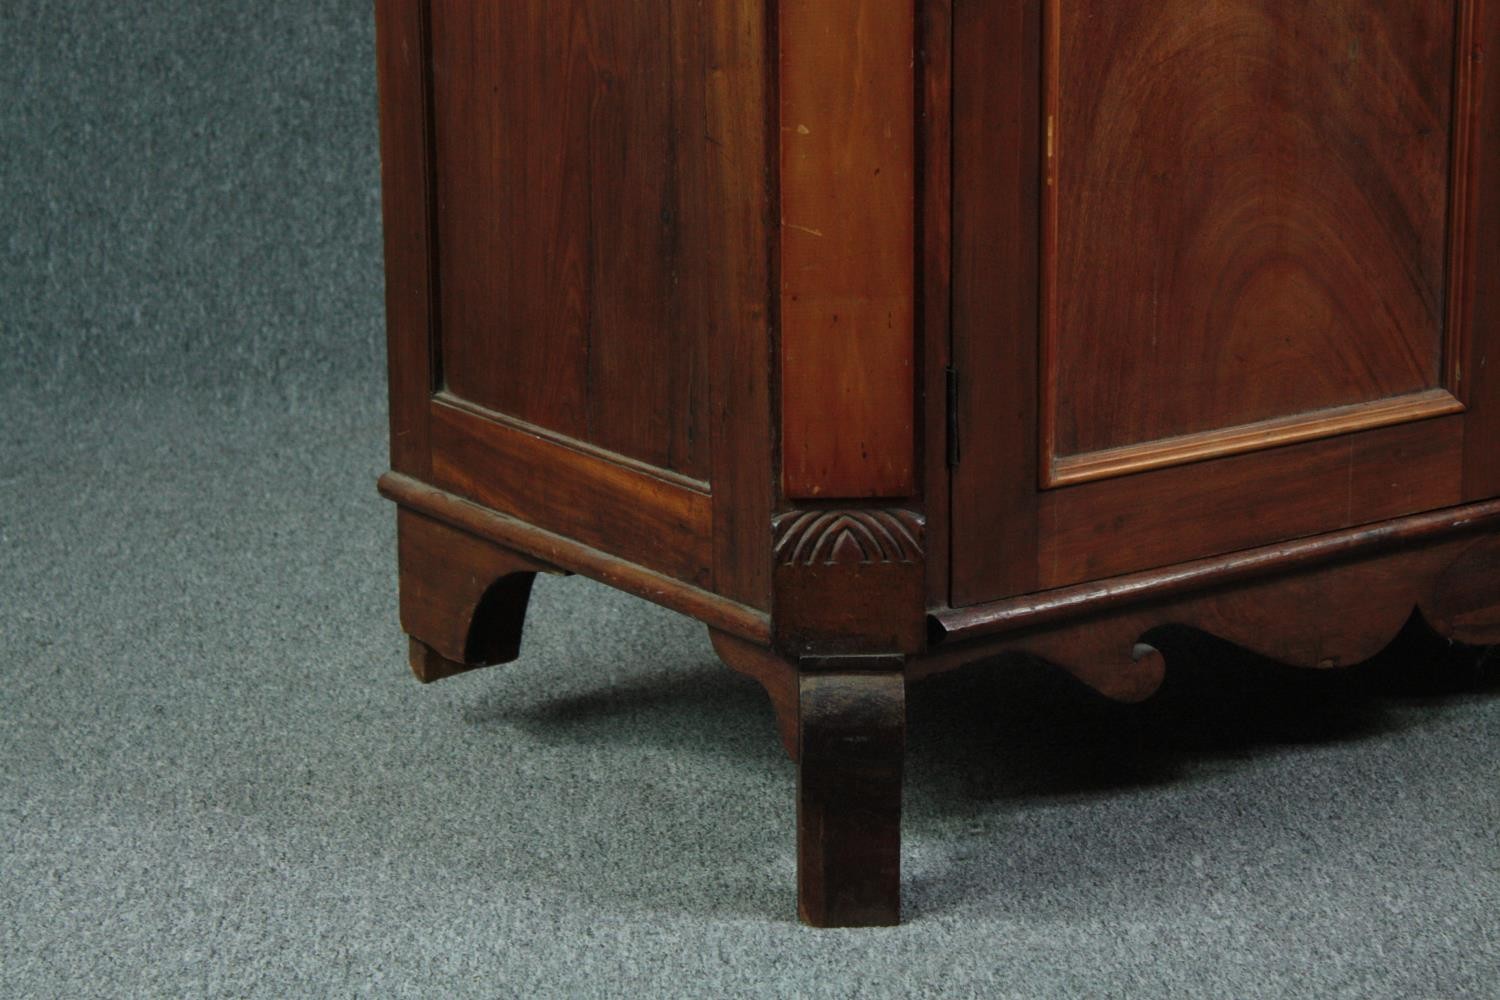 Cabinet, 19th century Continental flame mahogany. H.148 W.124 D.54cm. (Rear leg damaged as shown). - Image 6 of 6